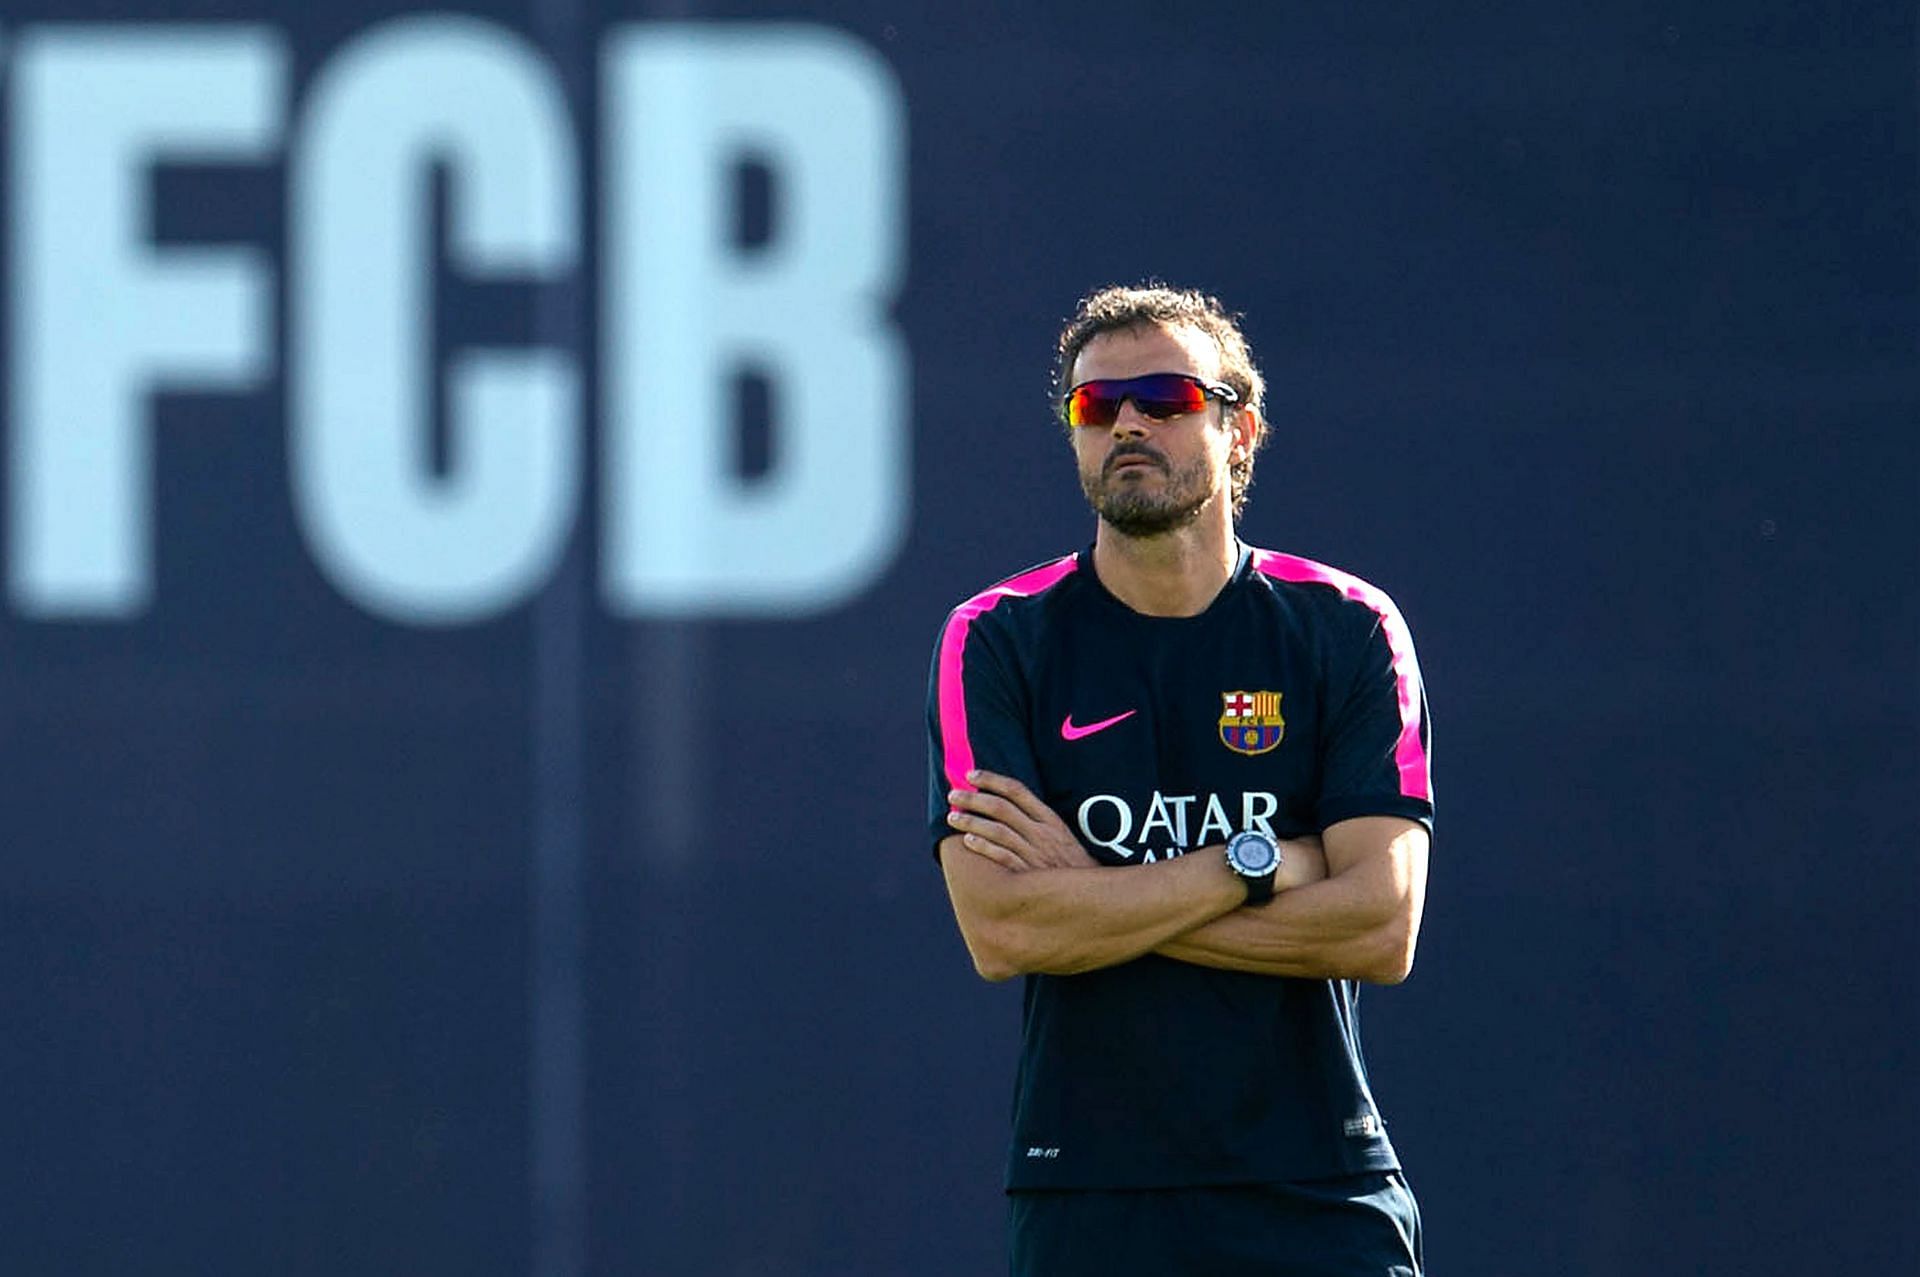 Luis Enrique is a former Barcelona player and manager.